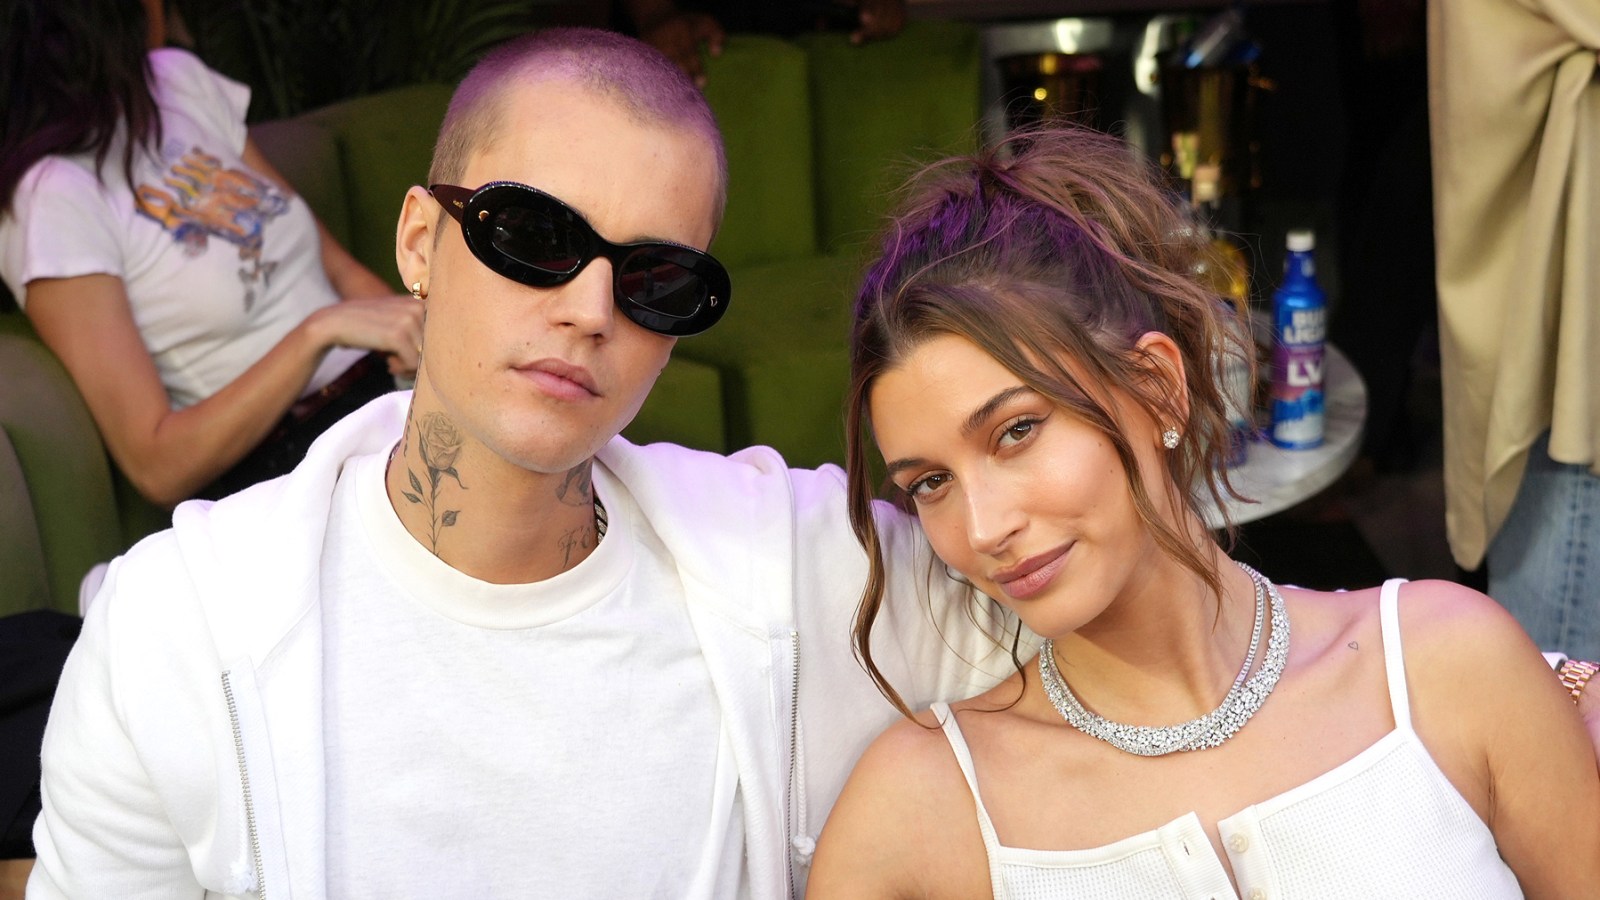 Baby, Baby, Baby: Justin and Hailey Bieber Are Expecting Their First Child Together